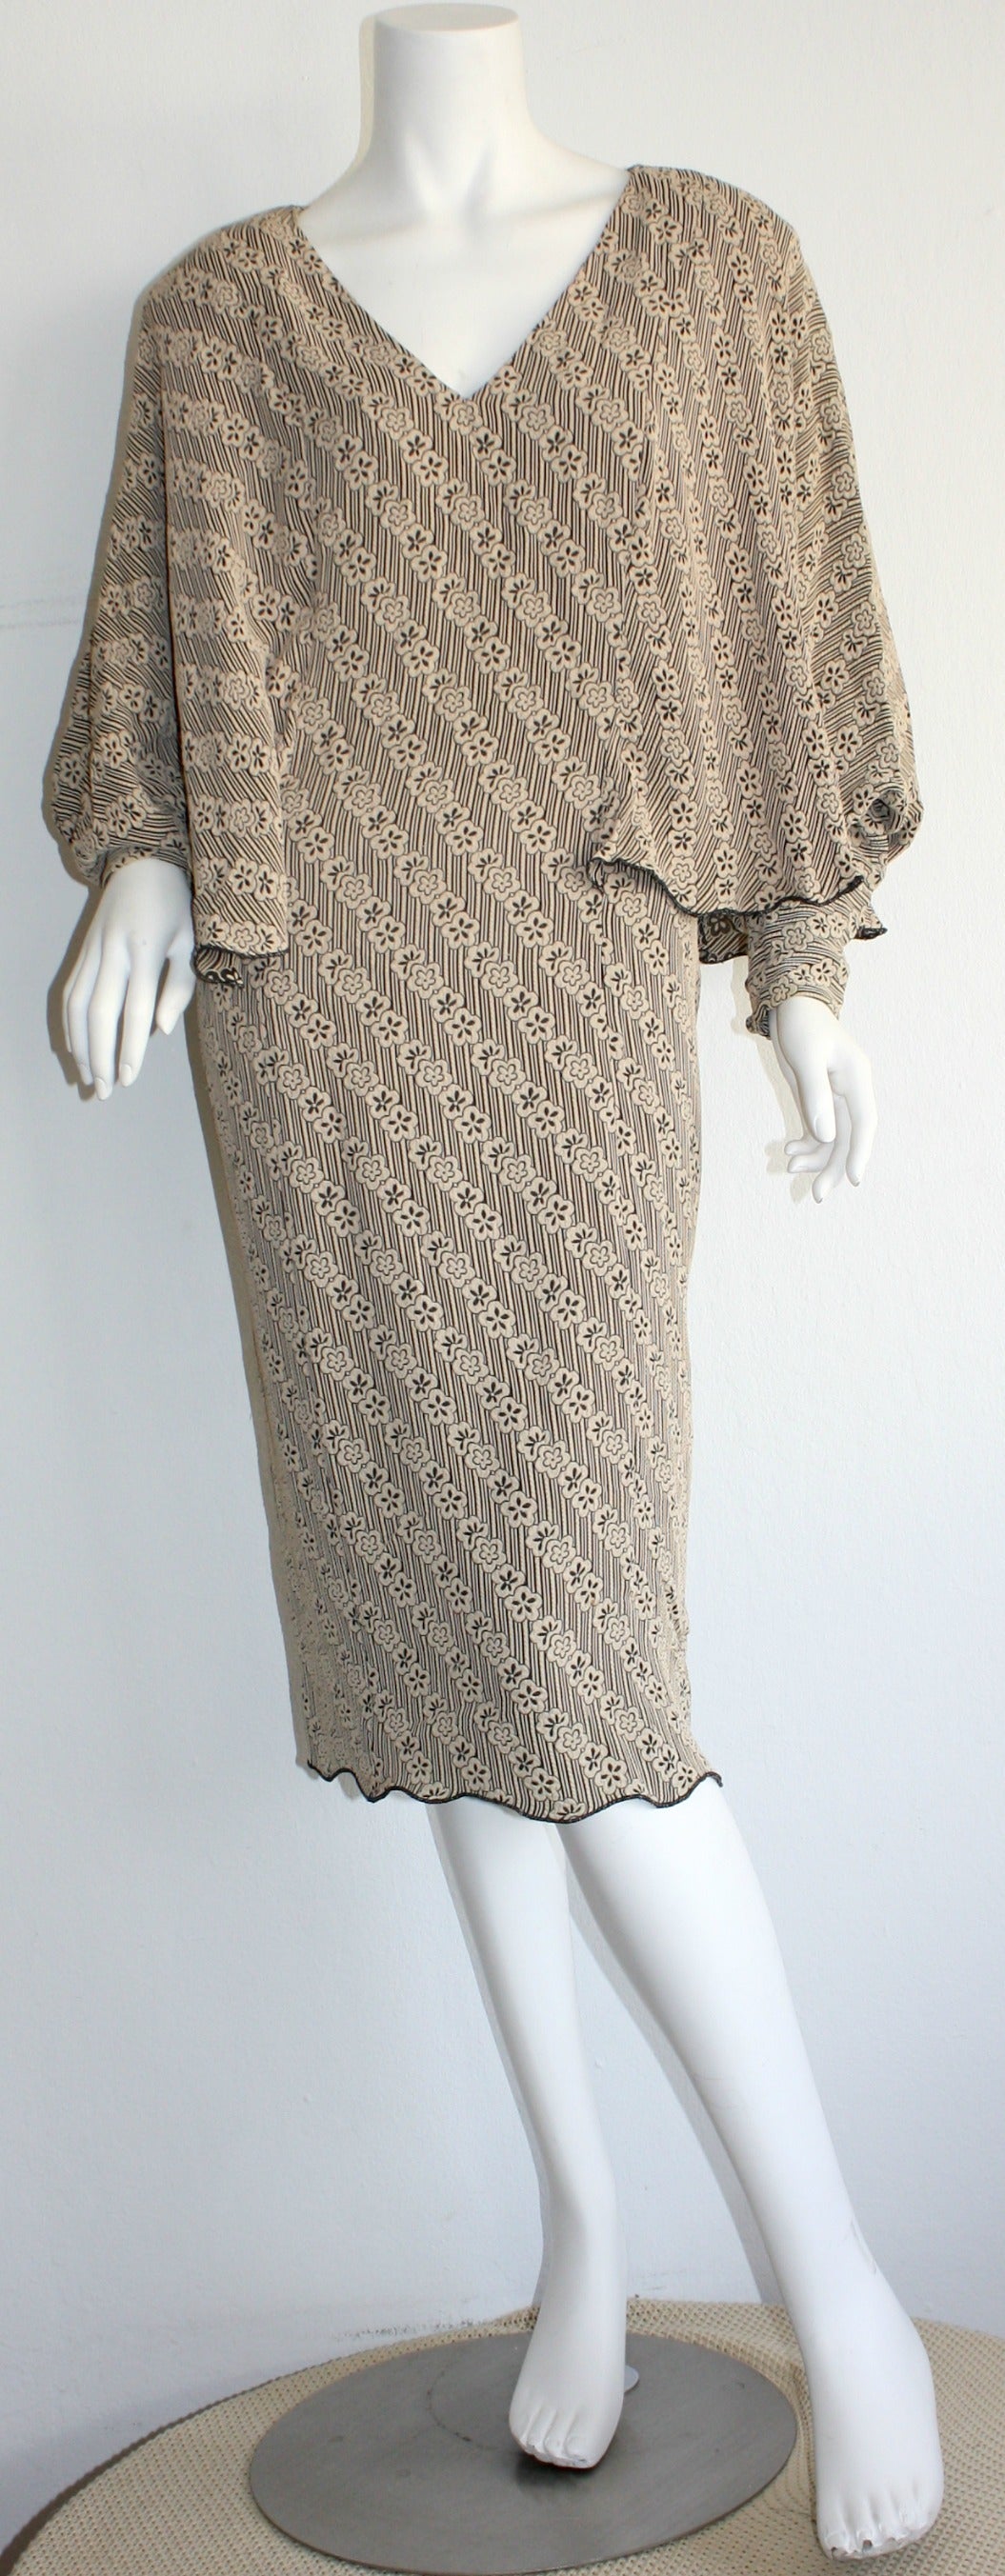 Superb vintage Holly's Harp cape dress! Beautiful beige/taupe color, with chic flower print 'sketches' throughout! Attached cape, with wonderful lettuce edged hem. Long sleeves, with three buttons at each cuff. This beauty easily transitions from